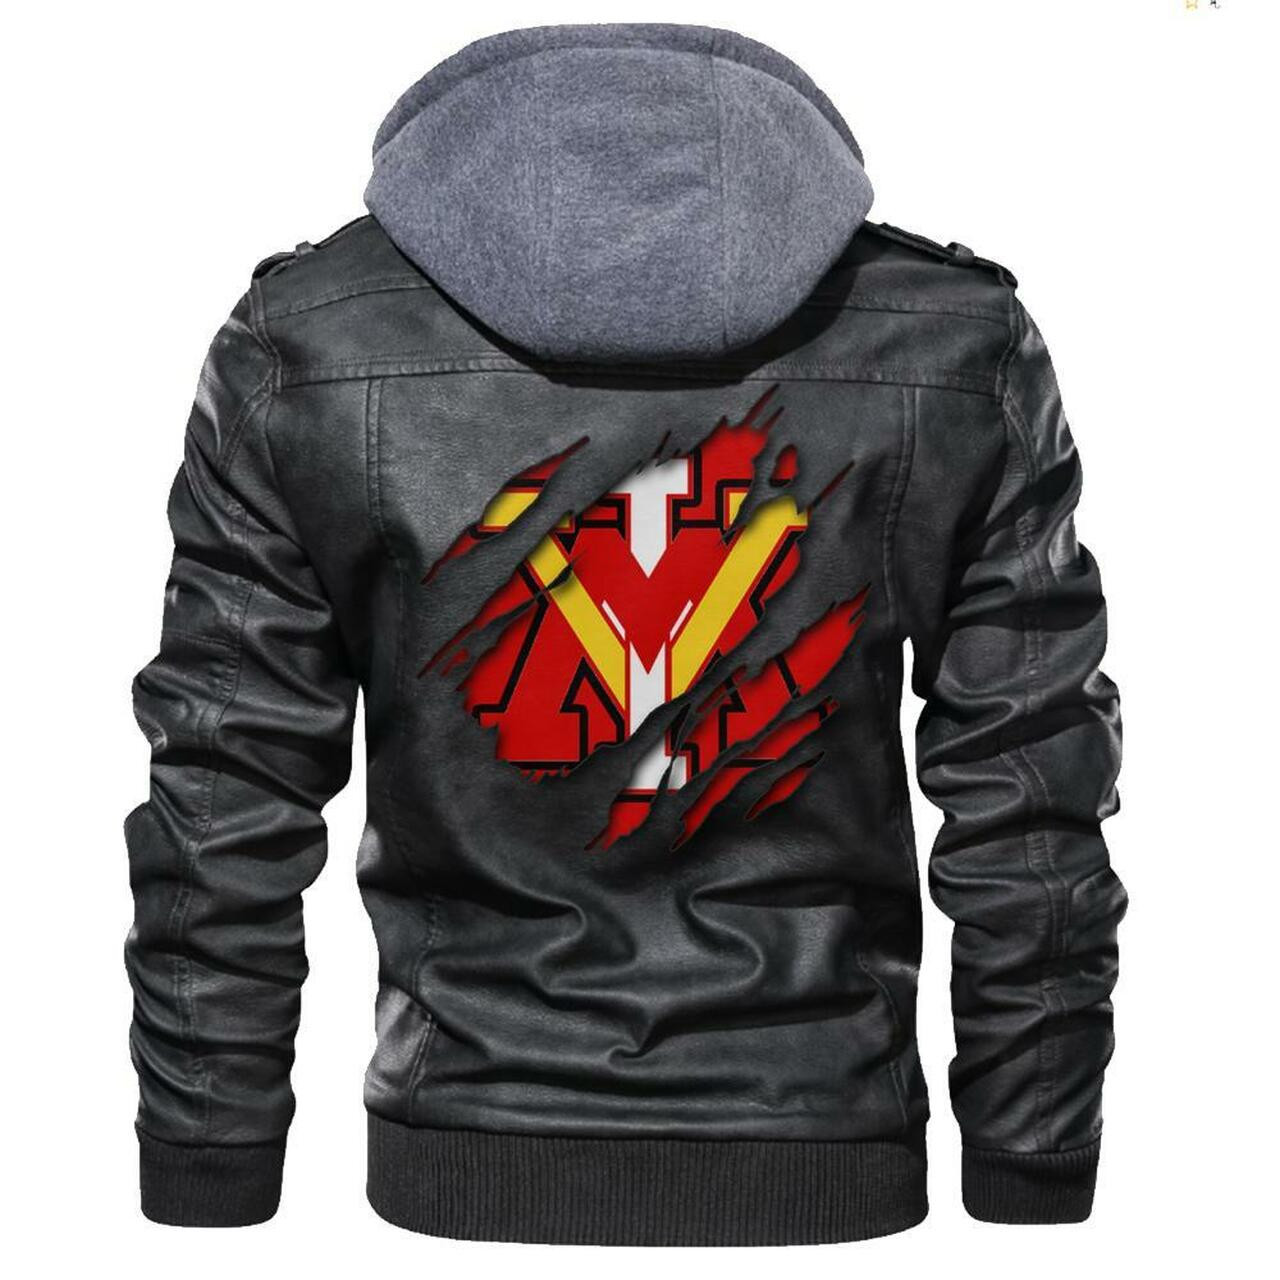 You'll have the perfect jacket in no time by clicking the link below 133